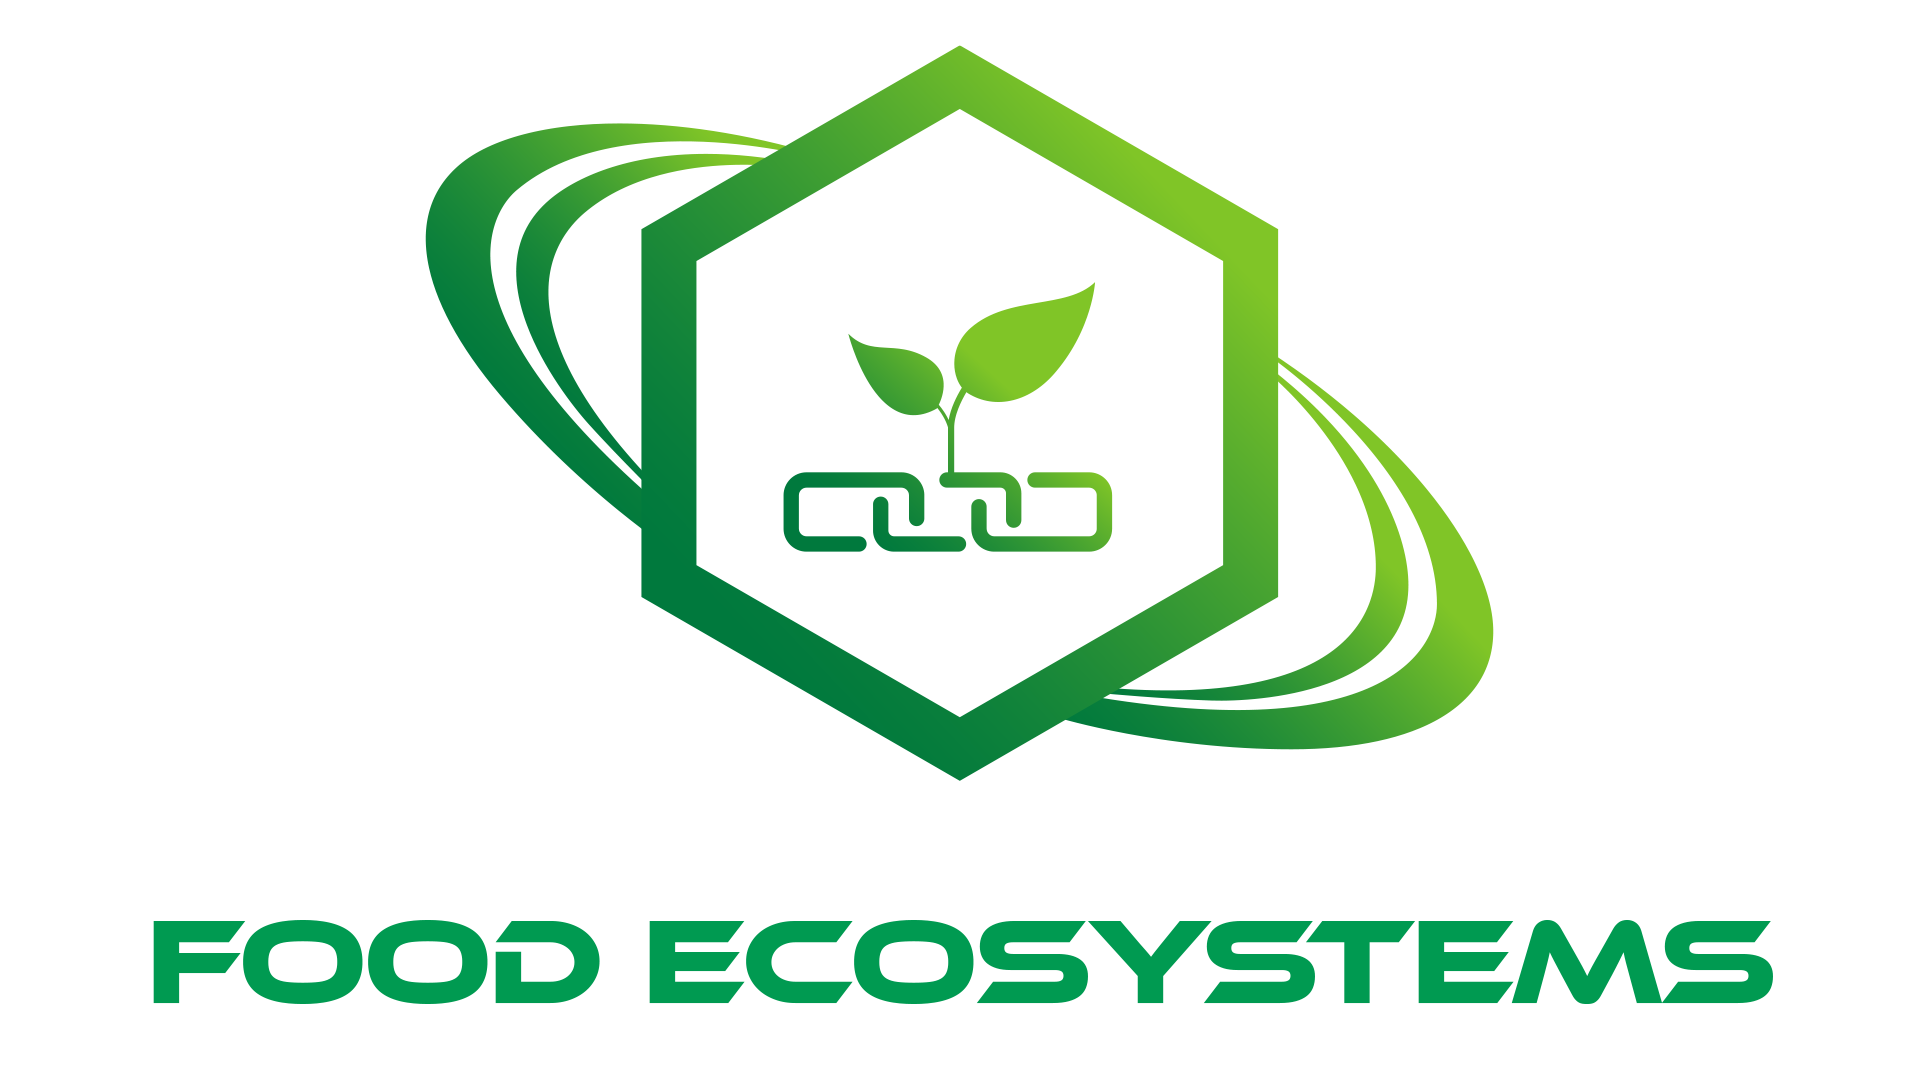 FoodEcoSystems